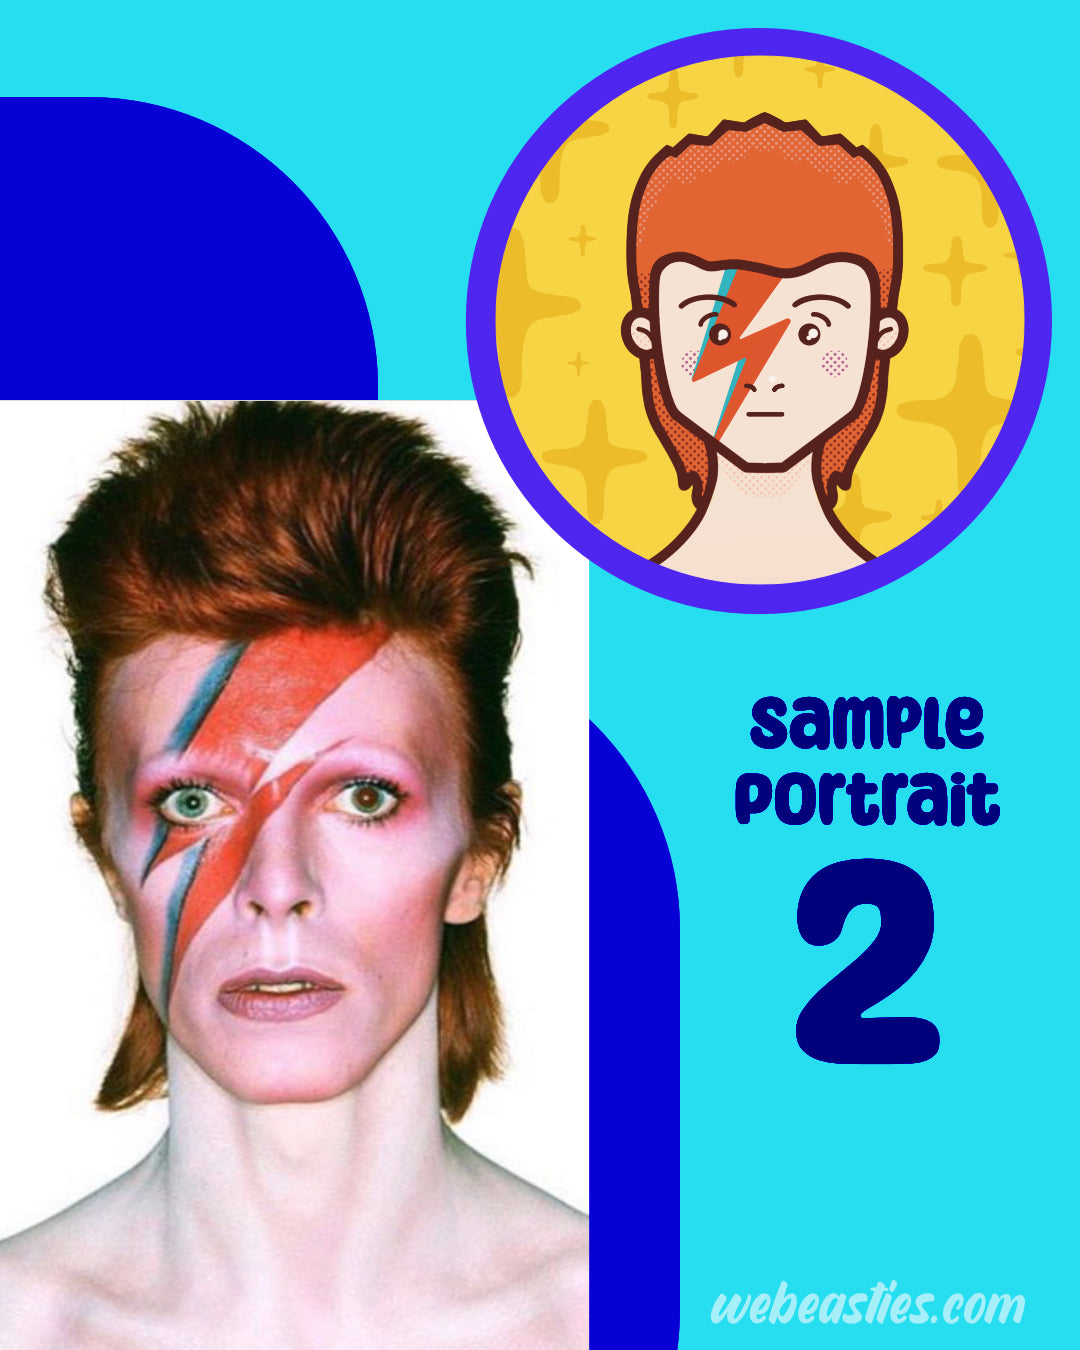 A sample profile picture featuring David Bowie with a lightning bolt painted on his face.